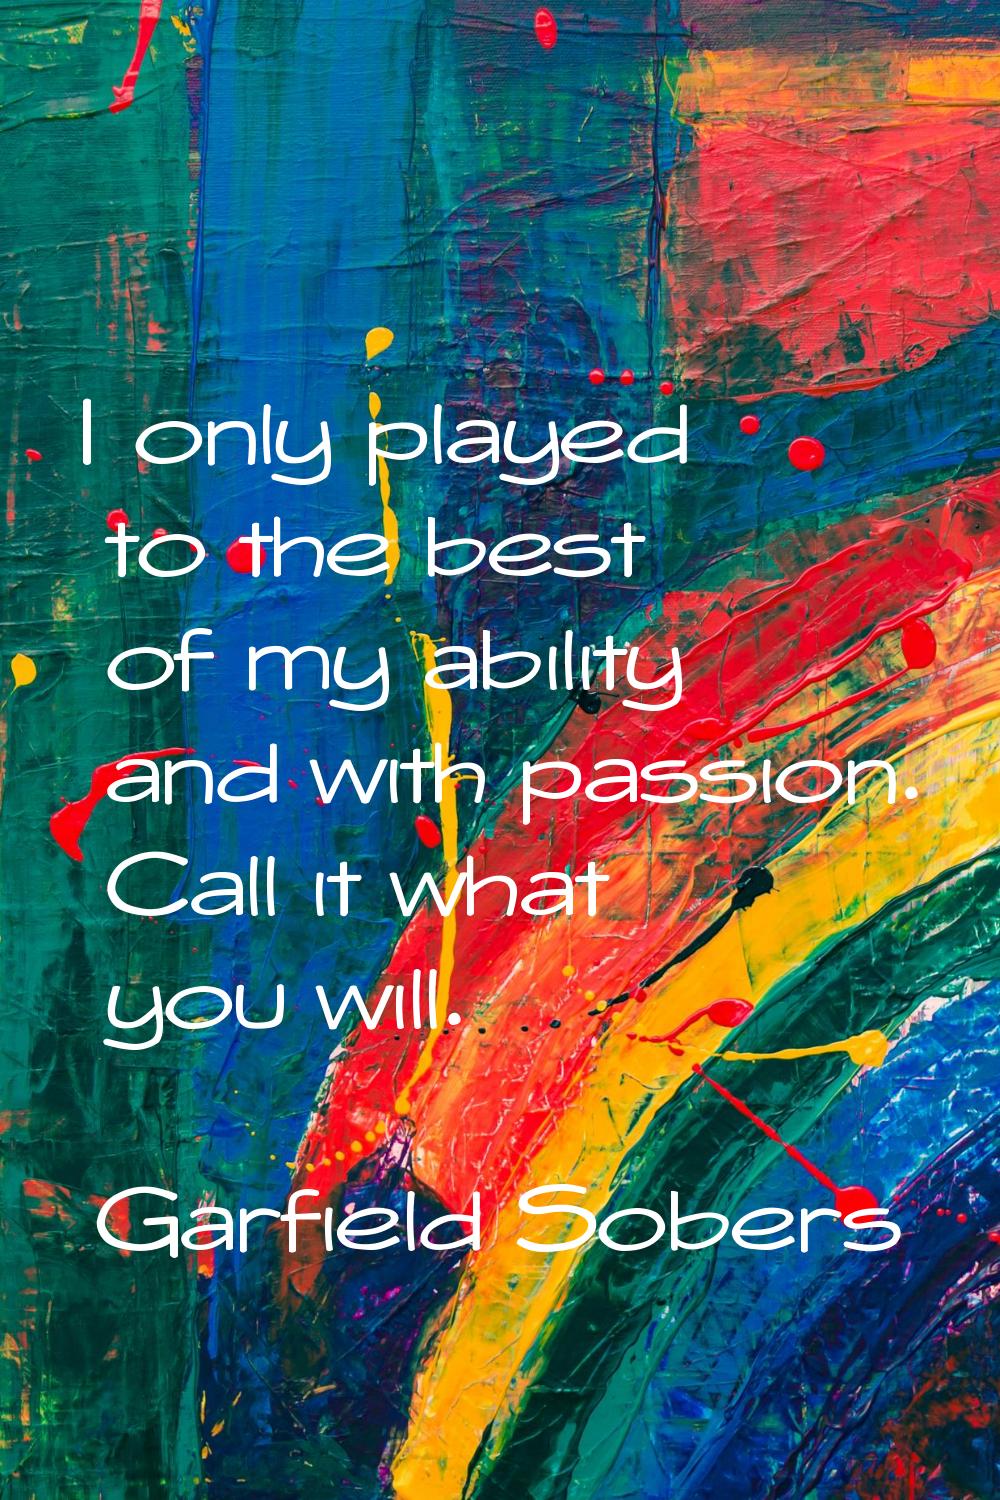 I only played to the best of my ability and with passion. Call it what you will.